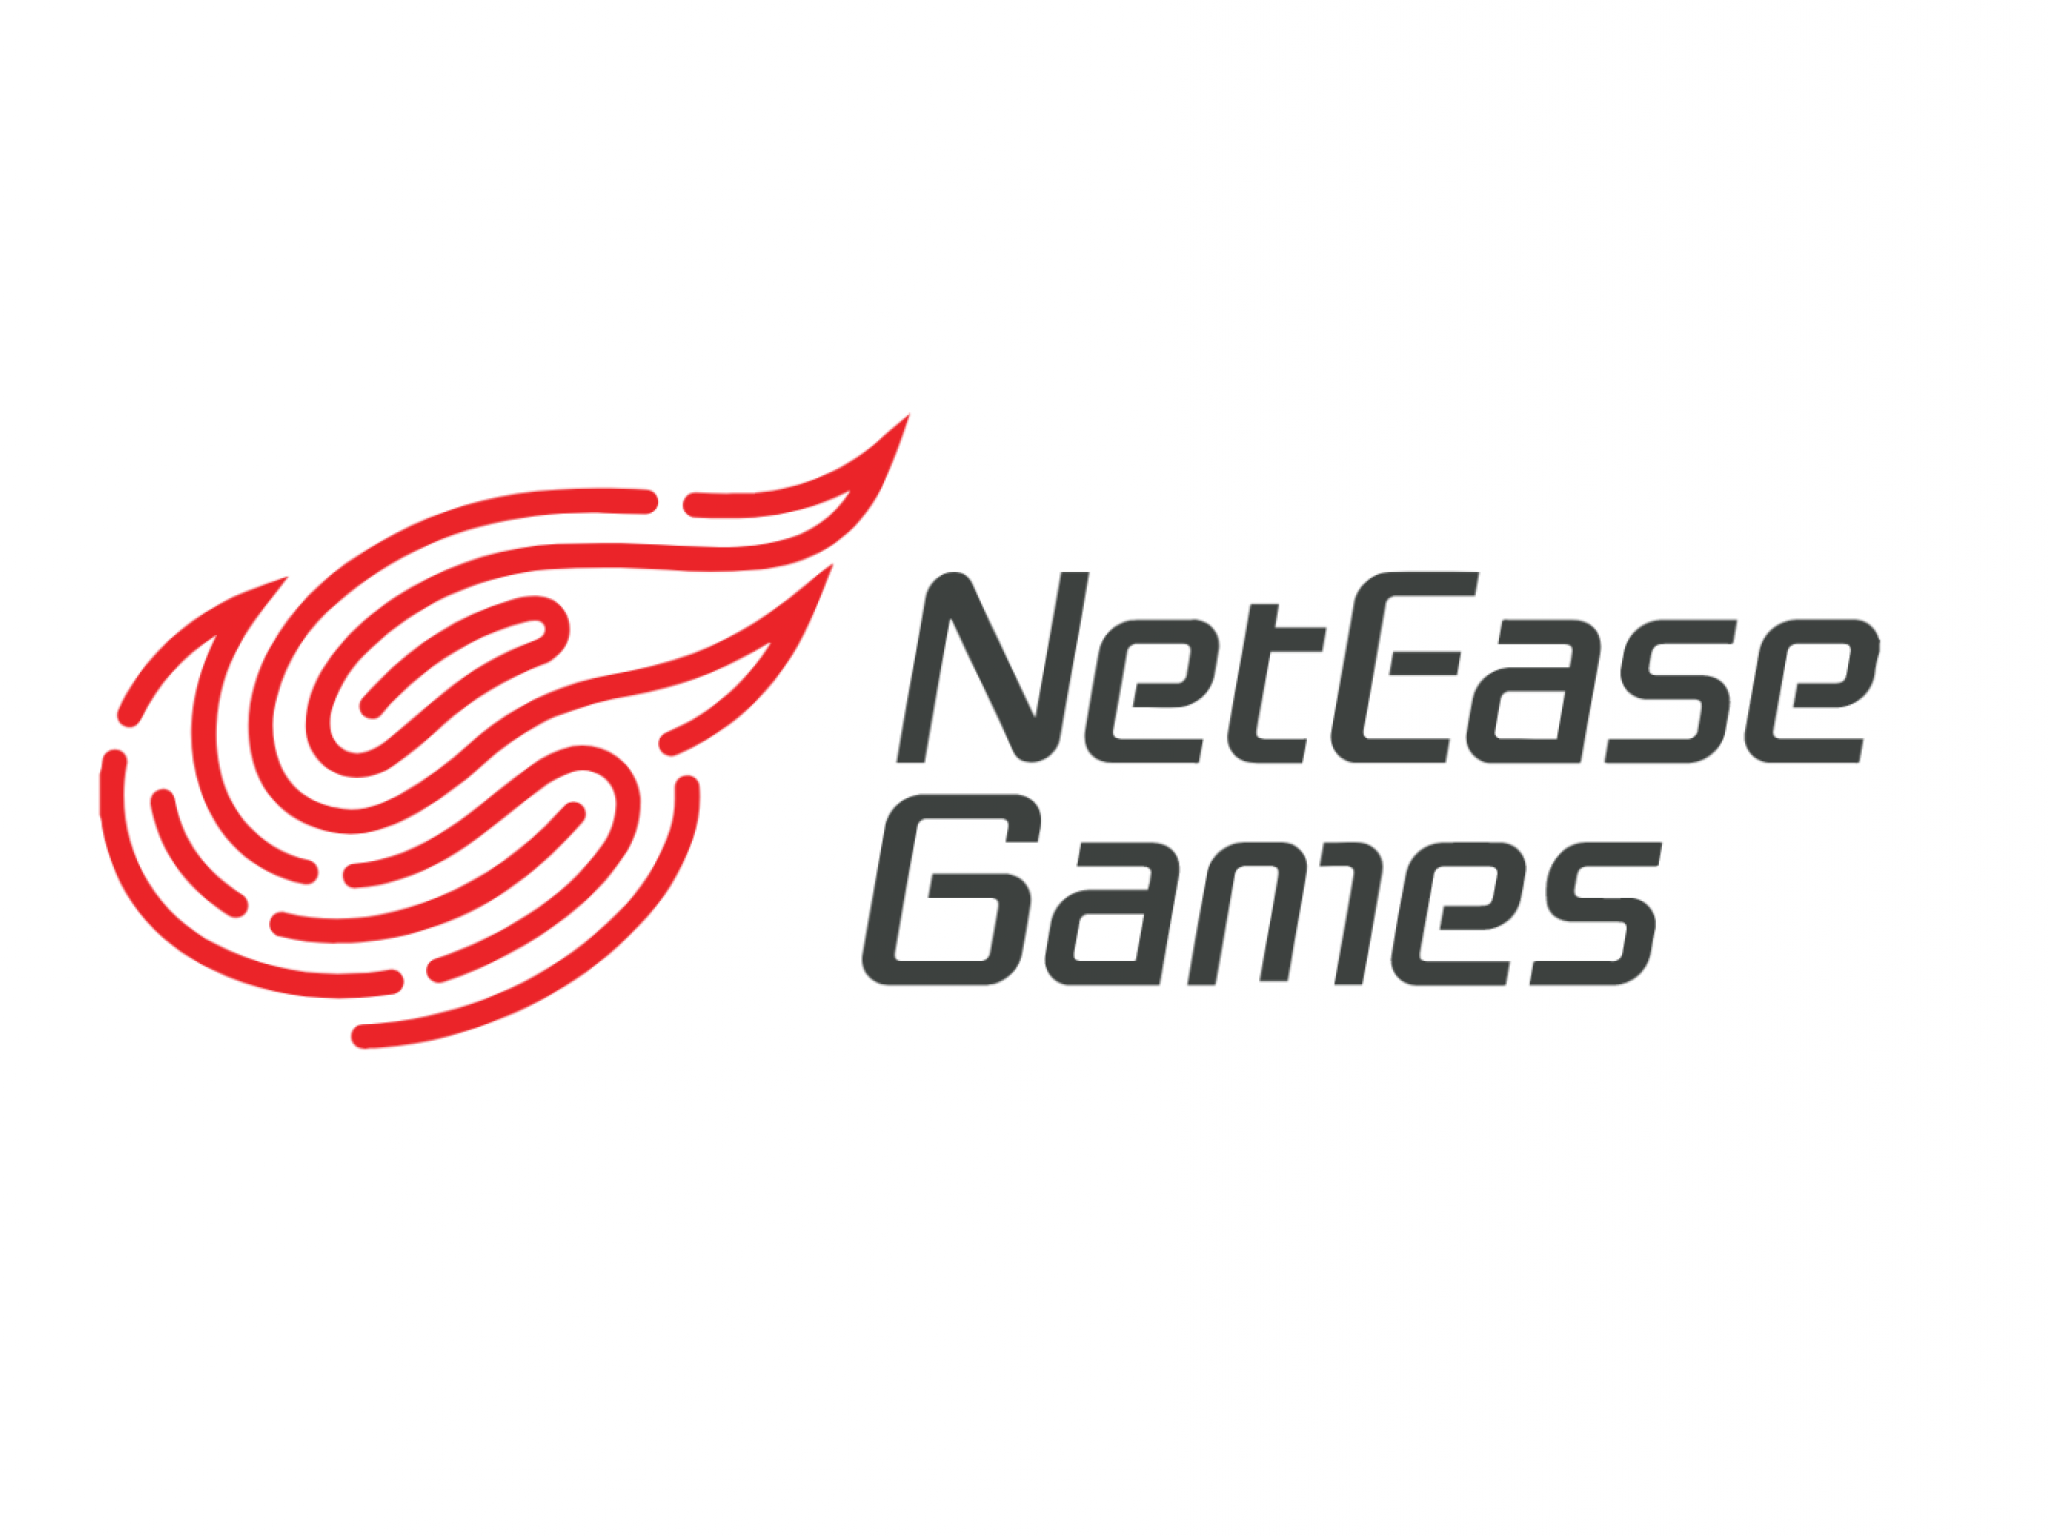  resilient-gaming-drive-netease-shines-in-post-pandemic-landscape-despite-q2-hiccups 